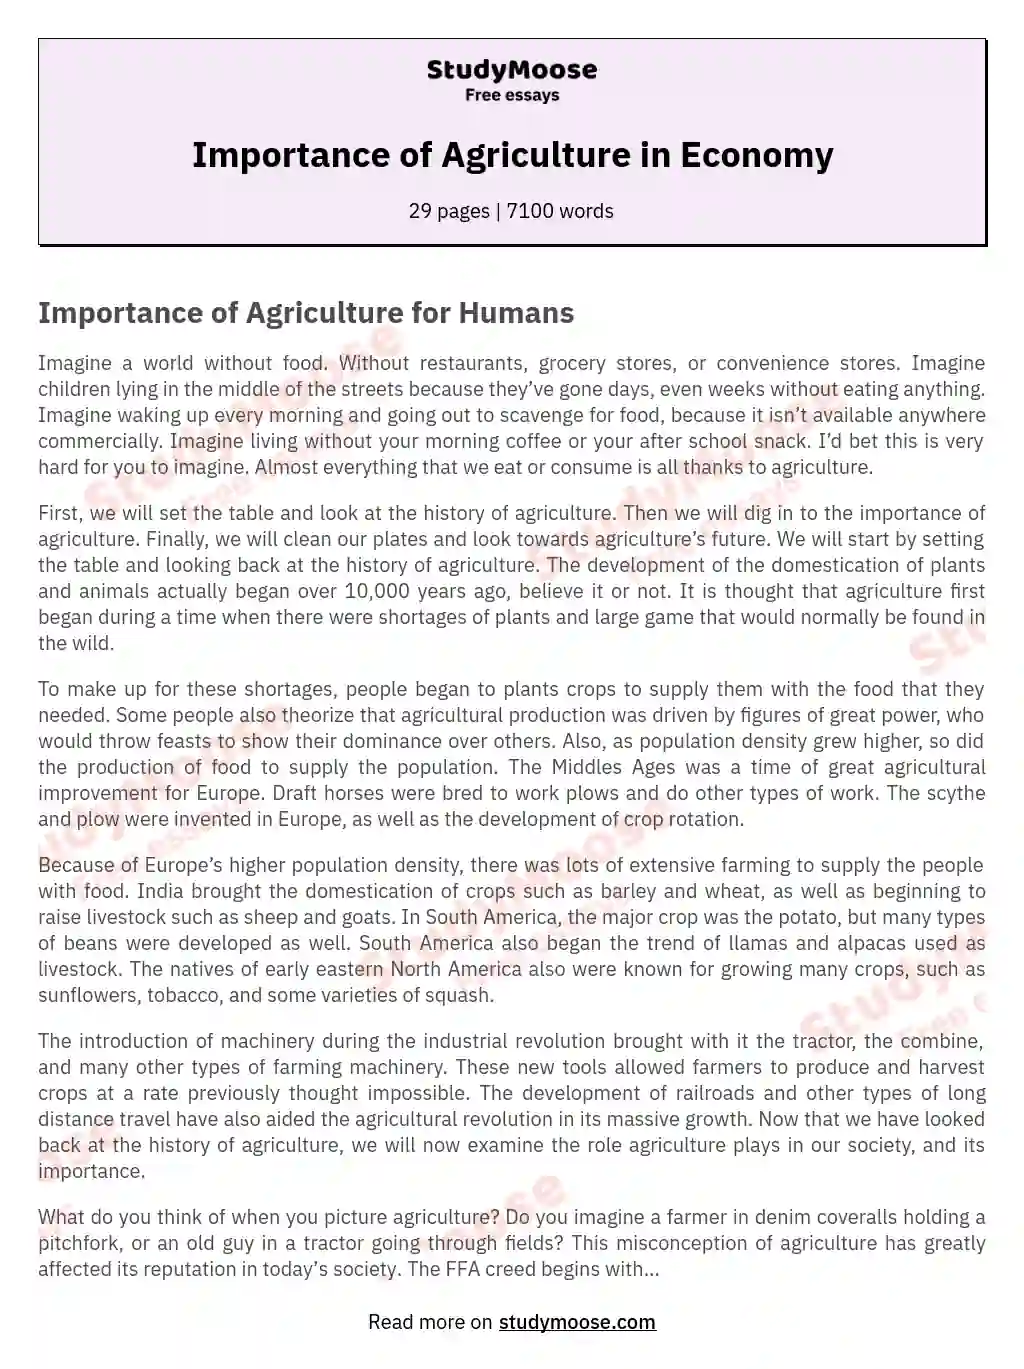 Importance of Agriculture in Economy essay